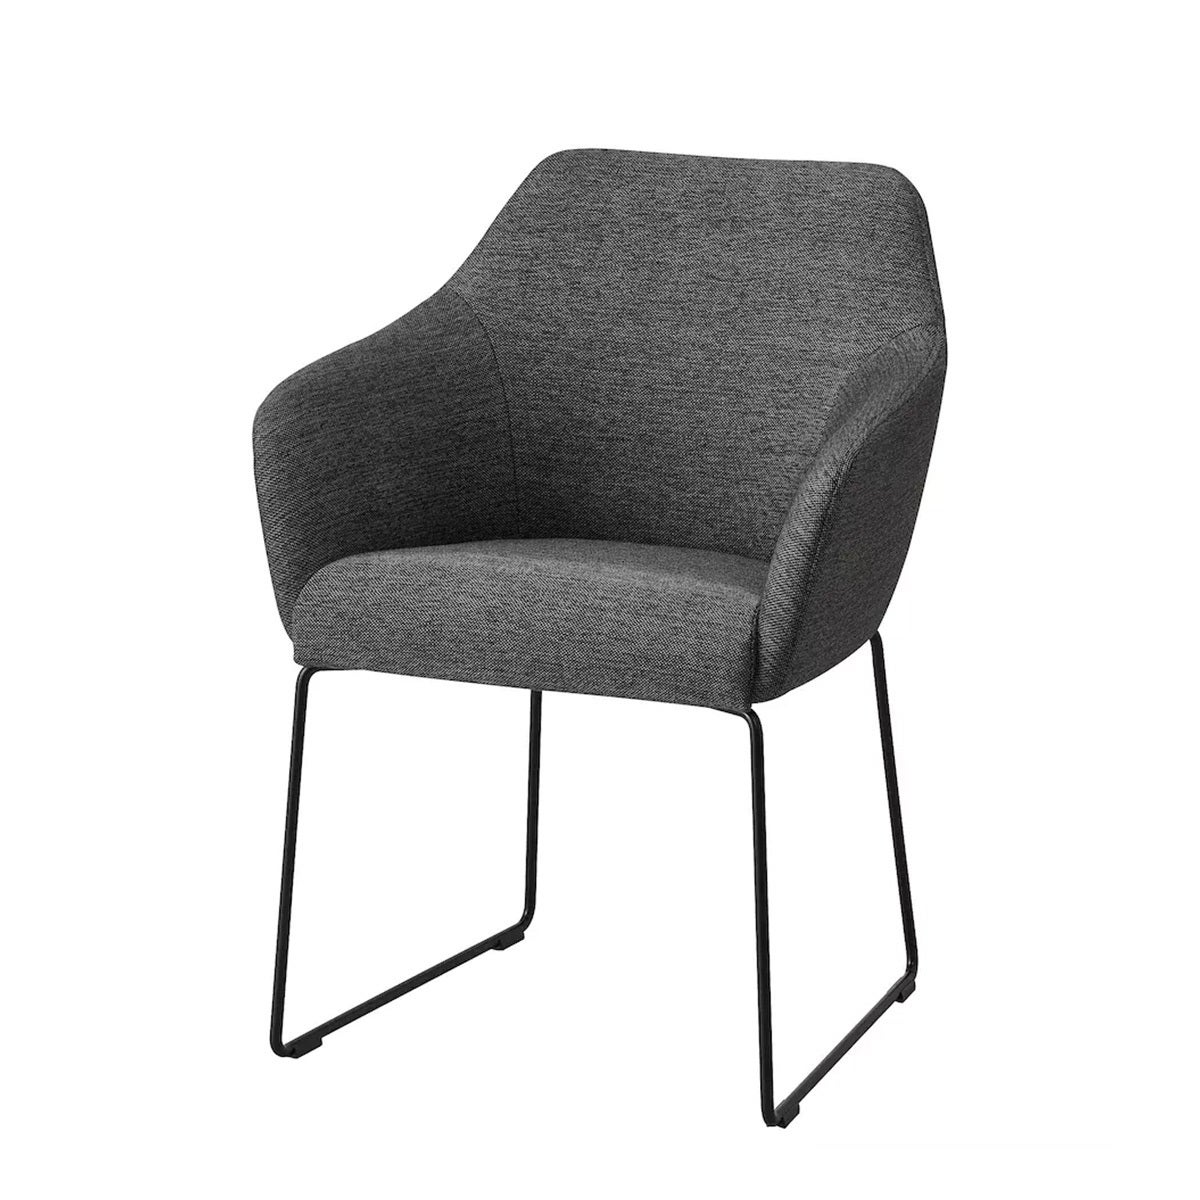 metal and gray chair from IKEA